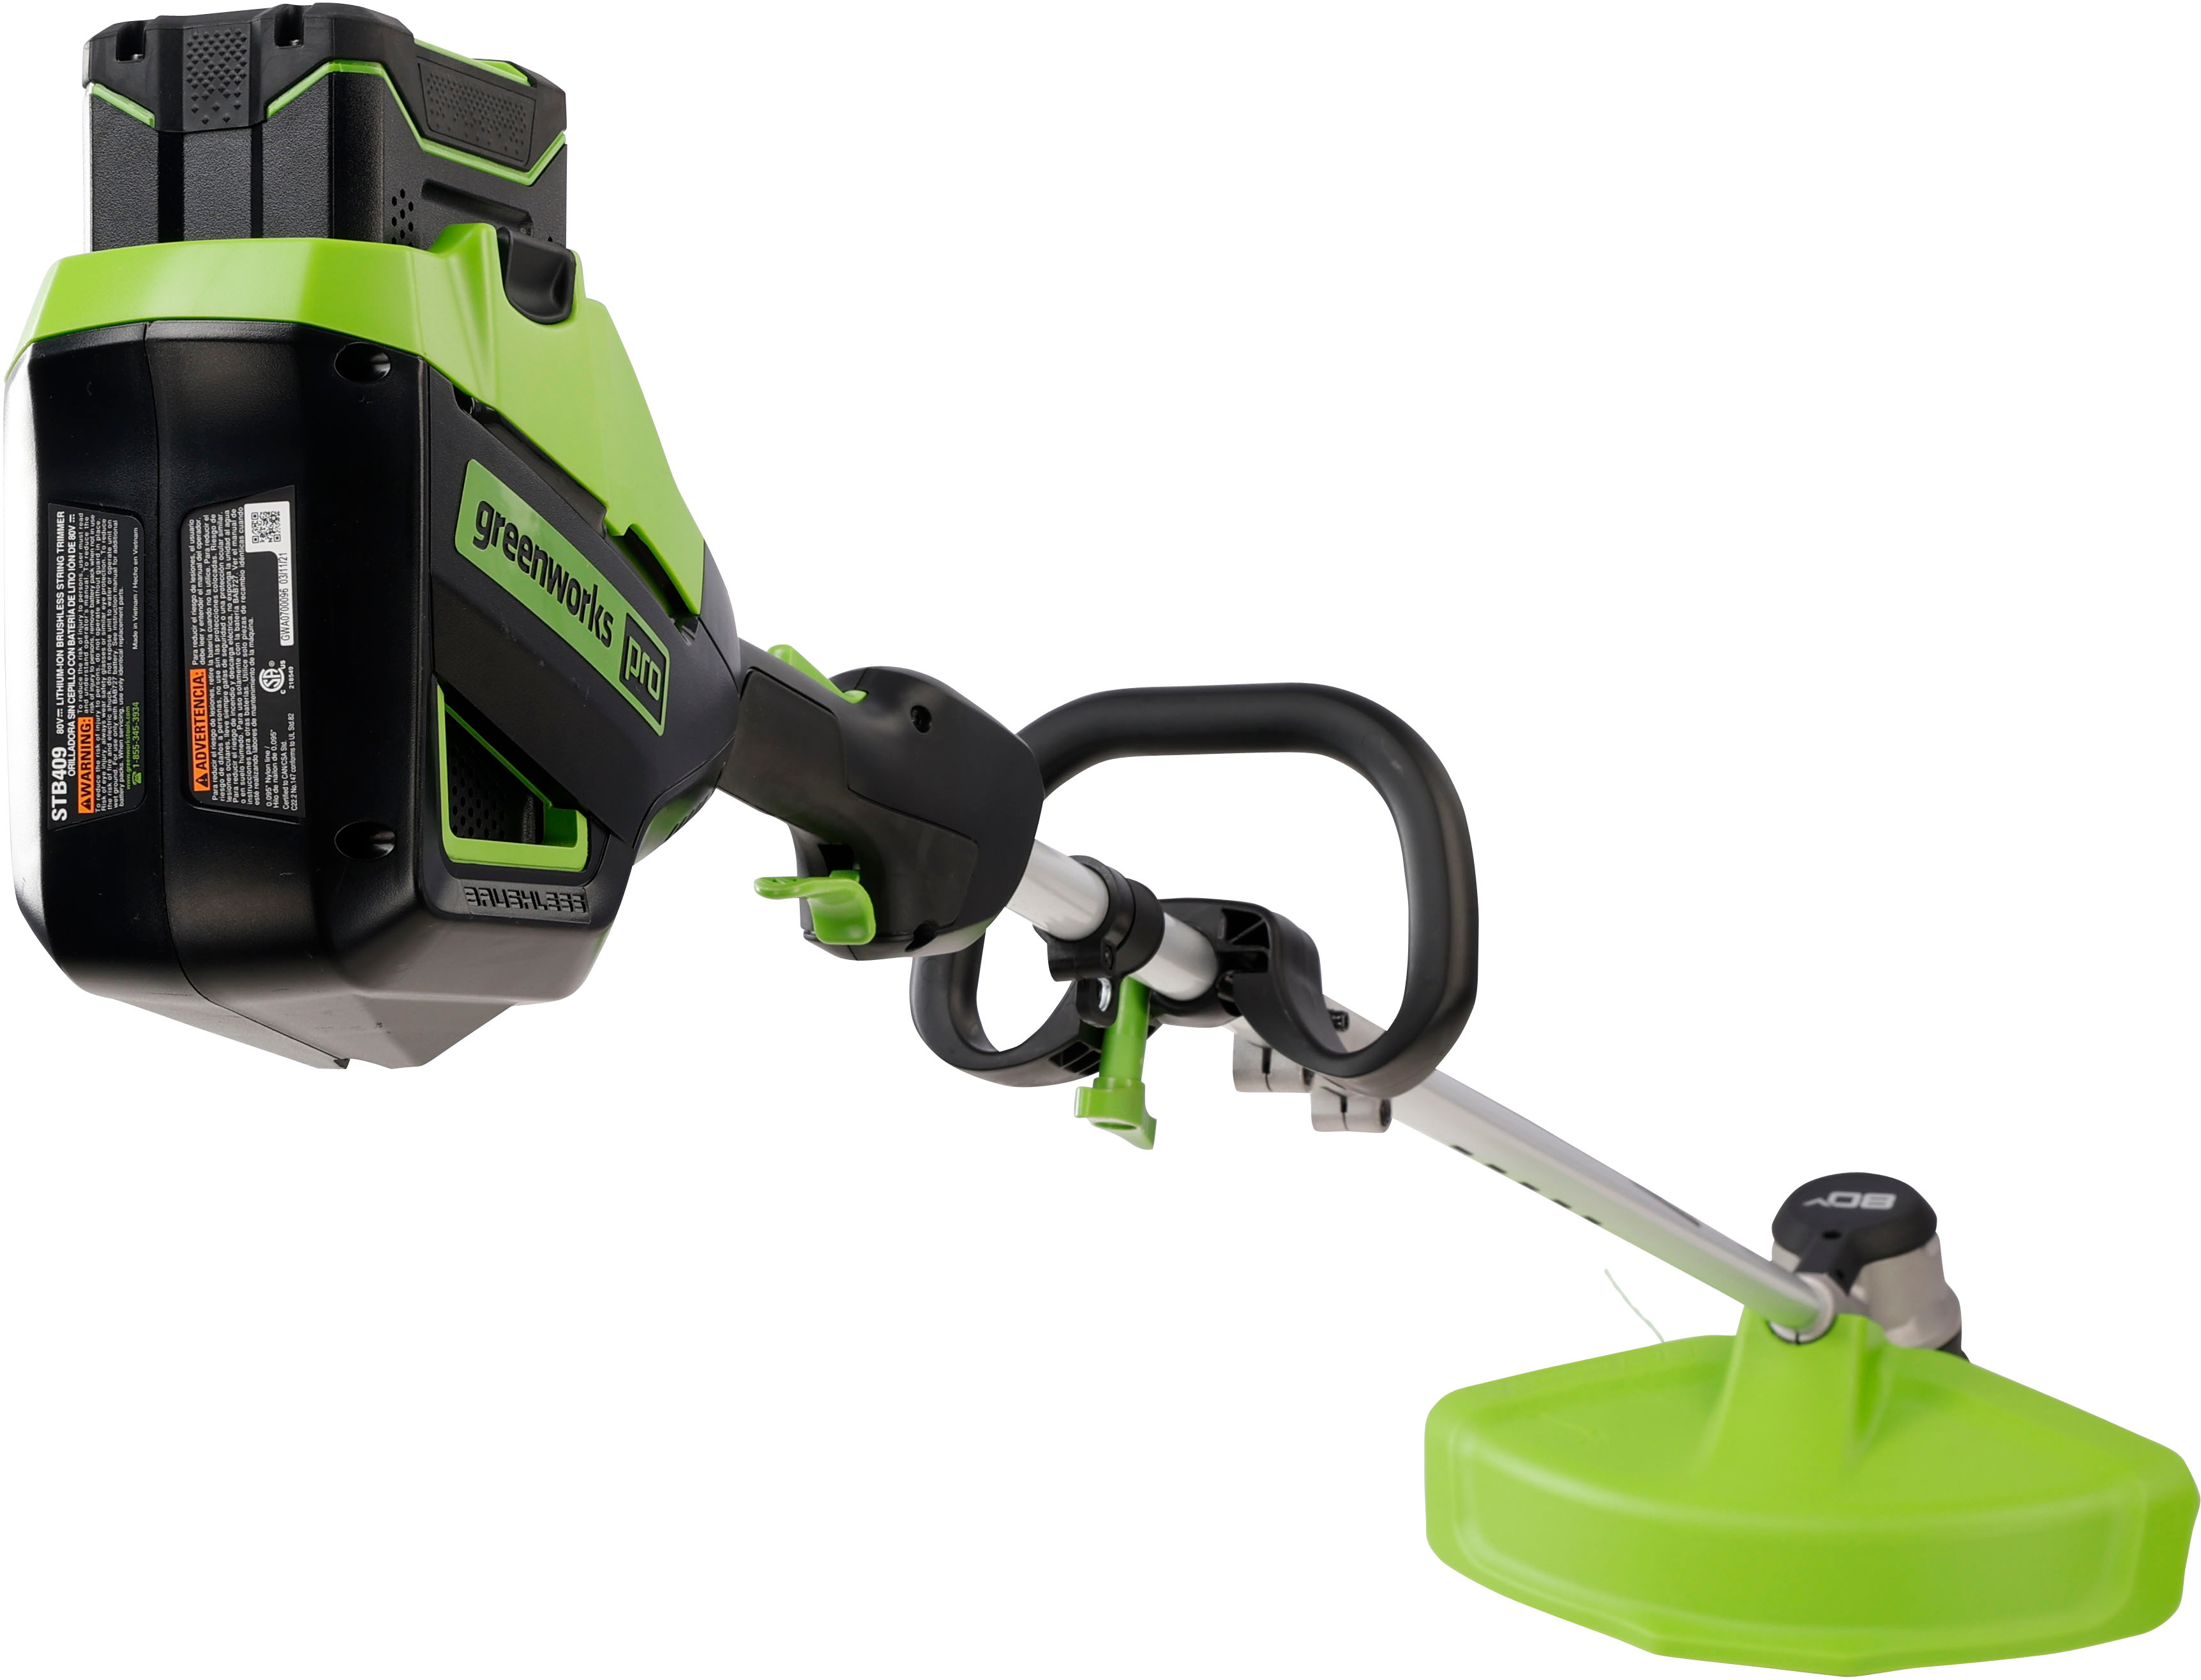 Angle View: Greenworks - 80V 16" Cutting Diameter  Brushless Straight Shaft Grass Trimmer 2.0 Ah Battery and Rapid Charger - Black/Green